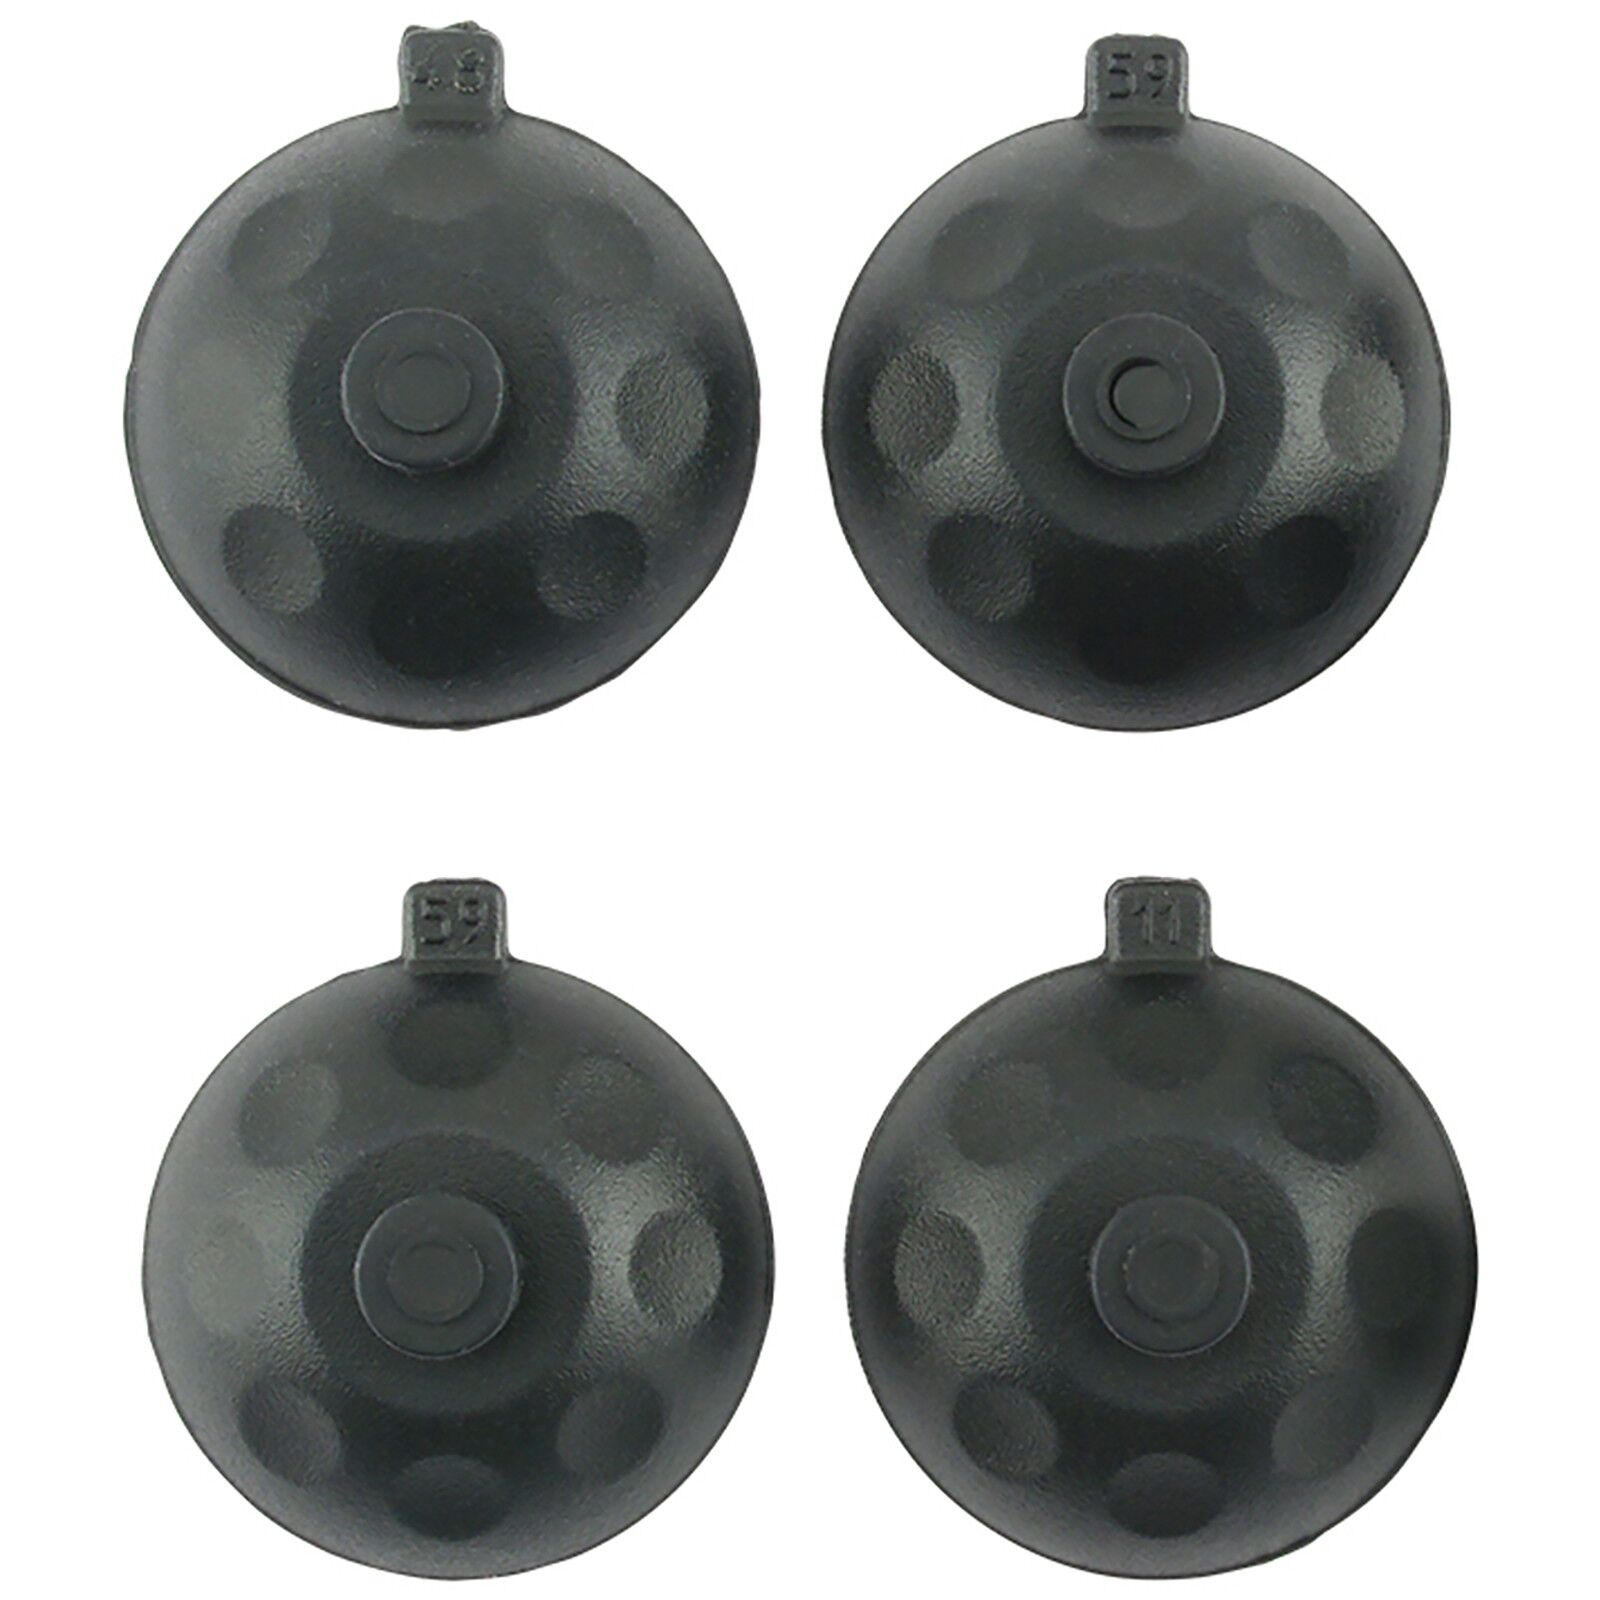 Fluval - U-Series Suction Cups